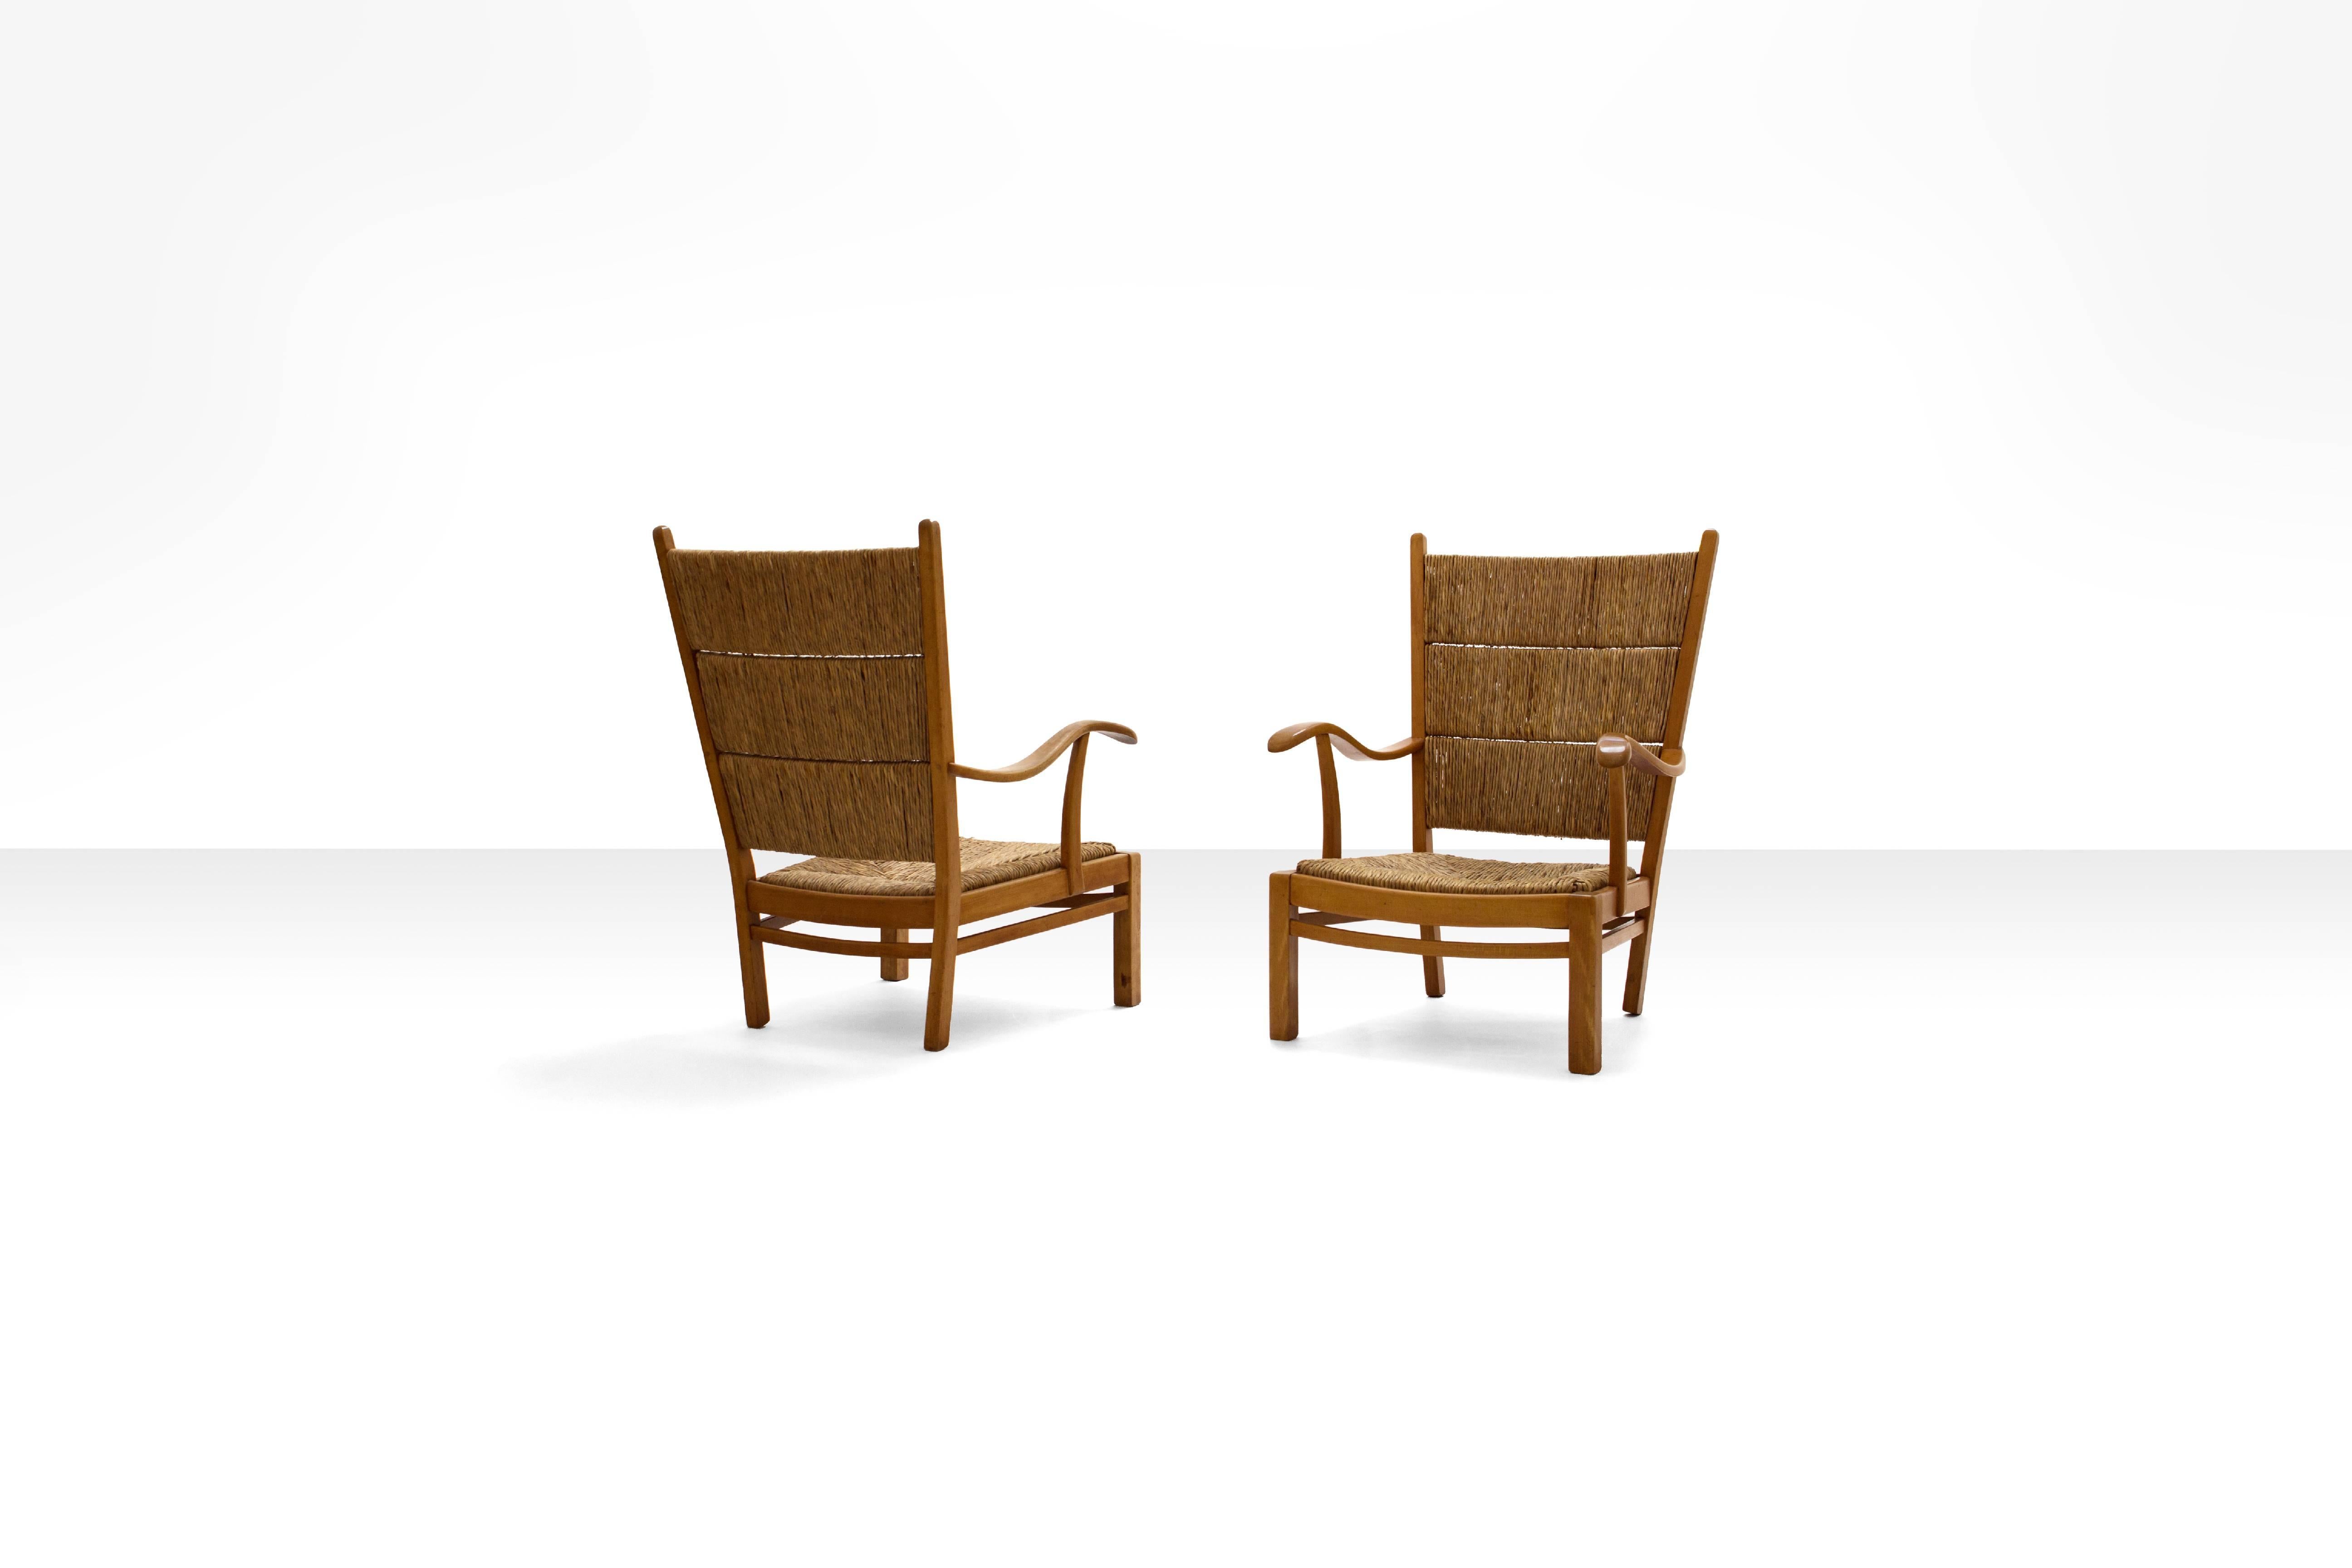 Dutch Mid-Century Armchairs in Beech and Straw, the Netherlands 1940s